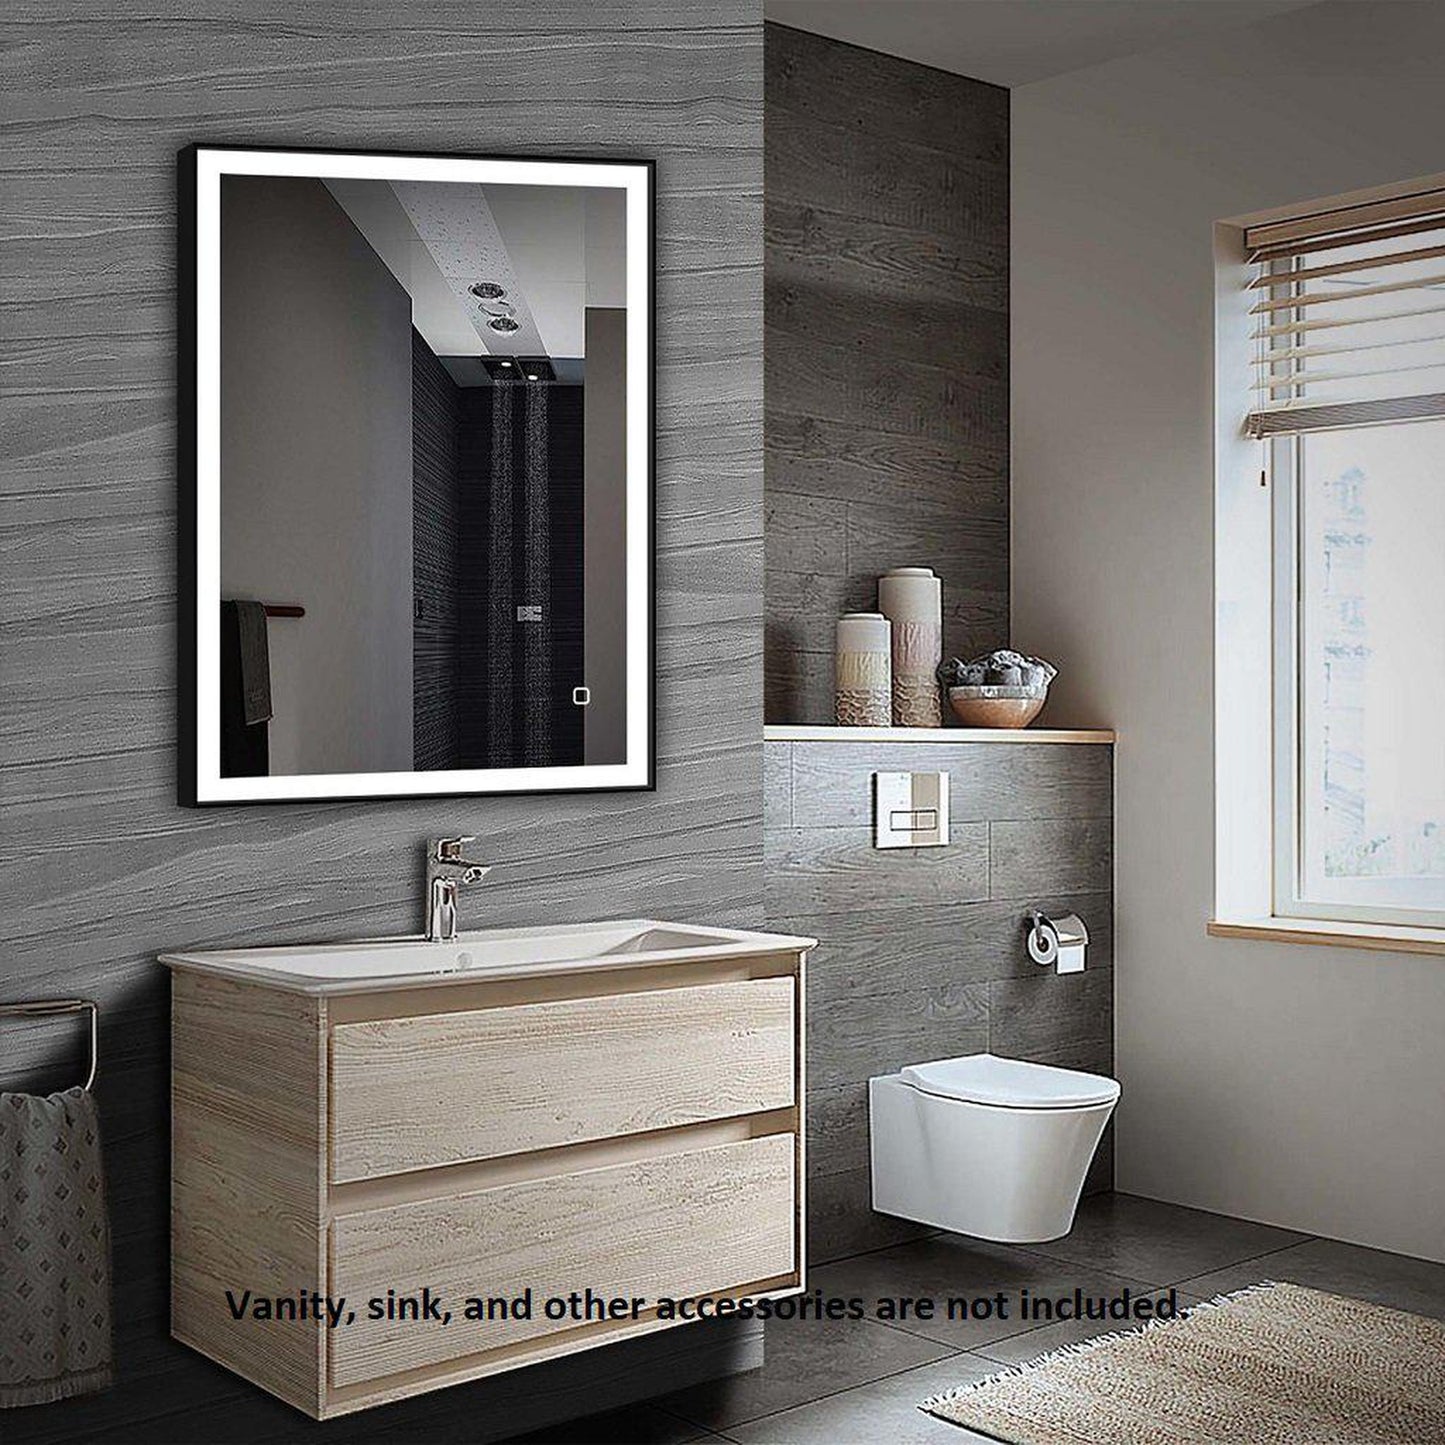 Lighted Impressions Caspian 30" x 36" Rectangular Framed Wall-Mounted LED Mirror With Dimmable Touch Sensor